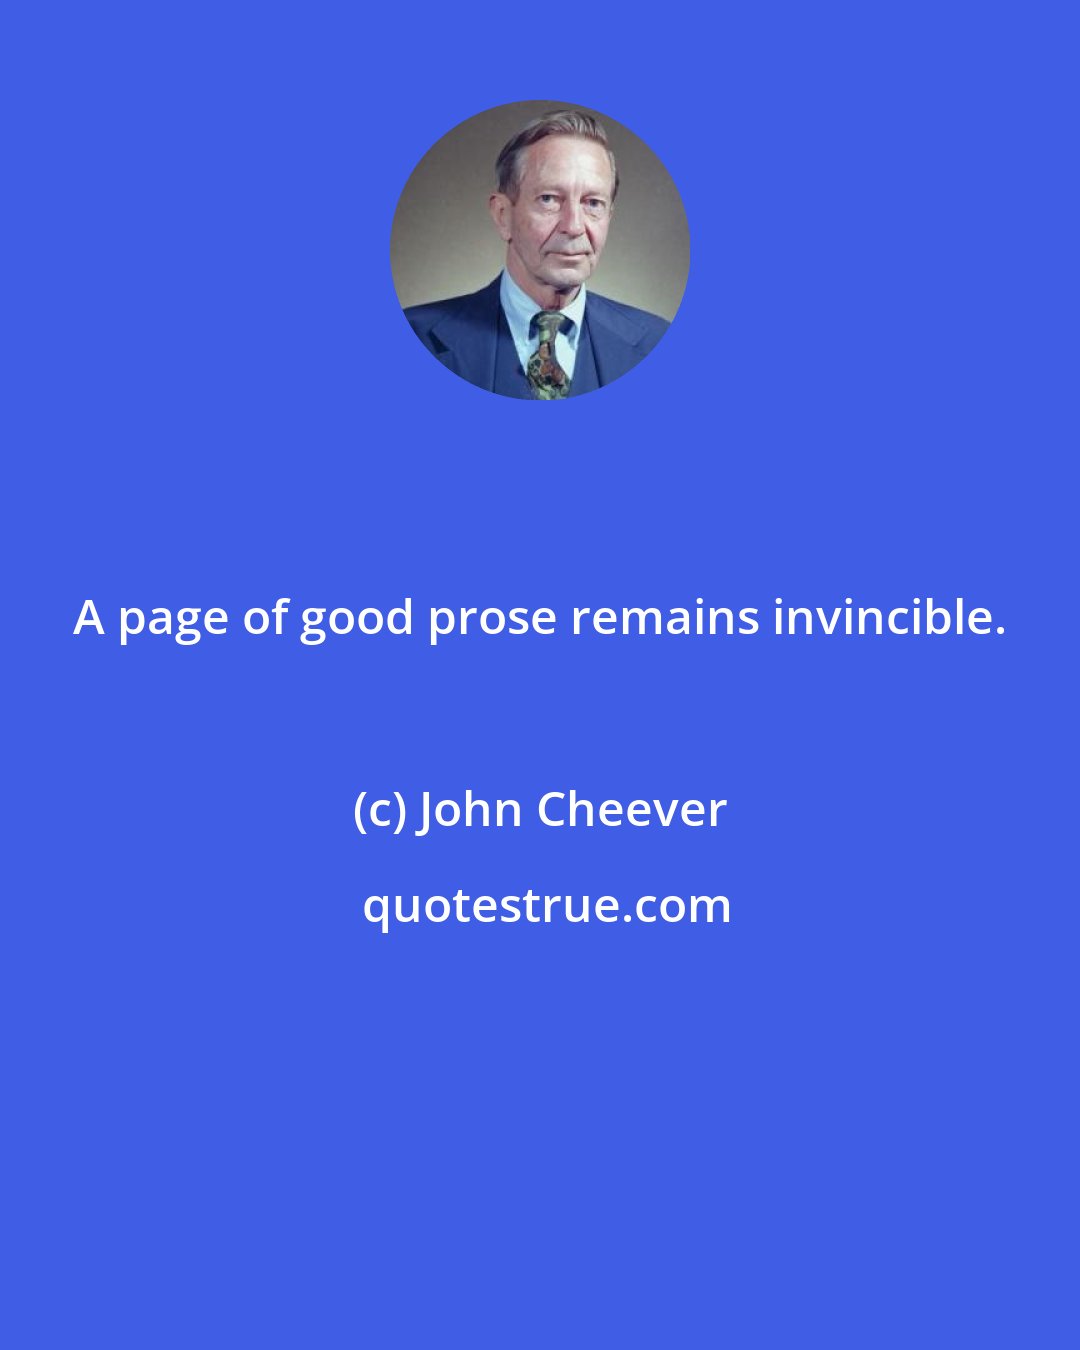 John Cheever: A page of good prose remains invincible.